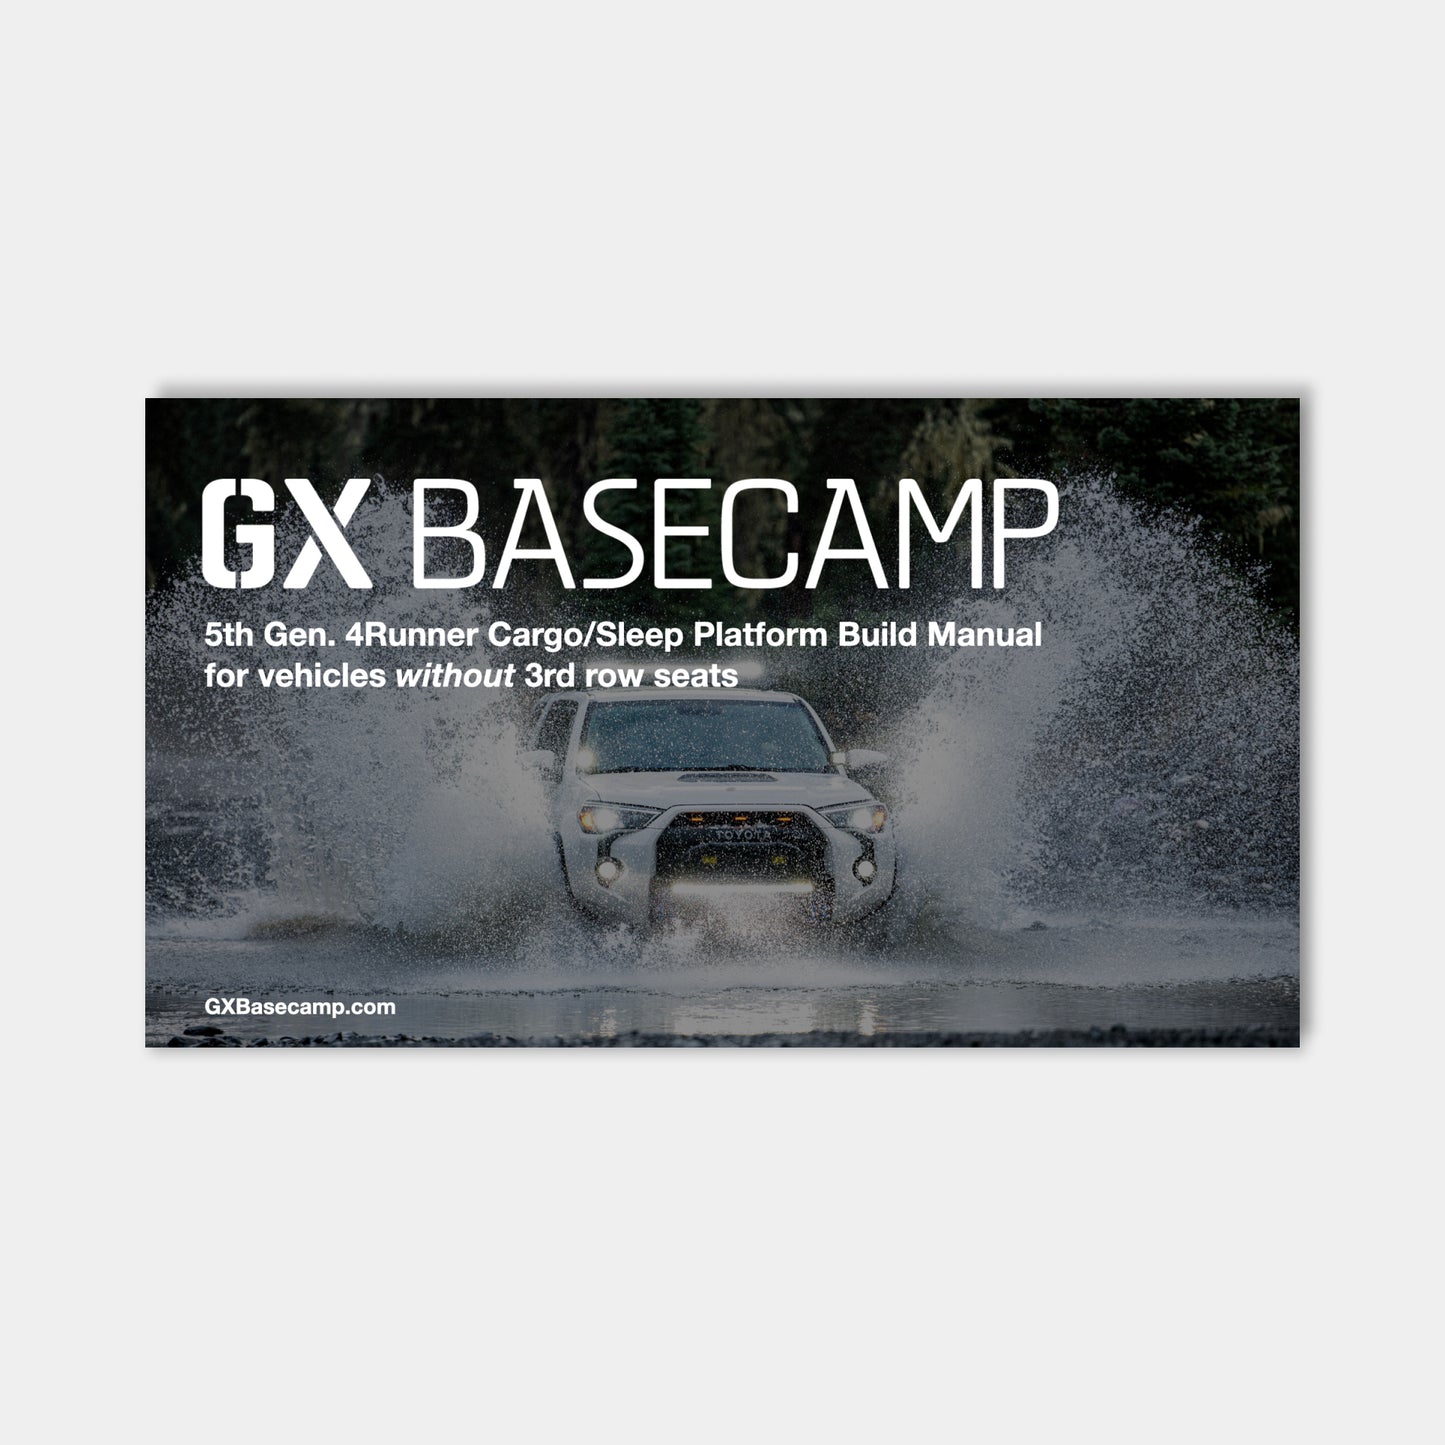 5th Gen. 4Runner Platform Build Manual (for vehicles without 3rd Row Seats) - Go Xplore Basecamp